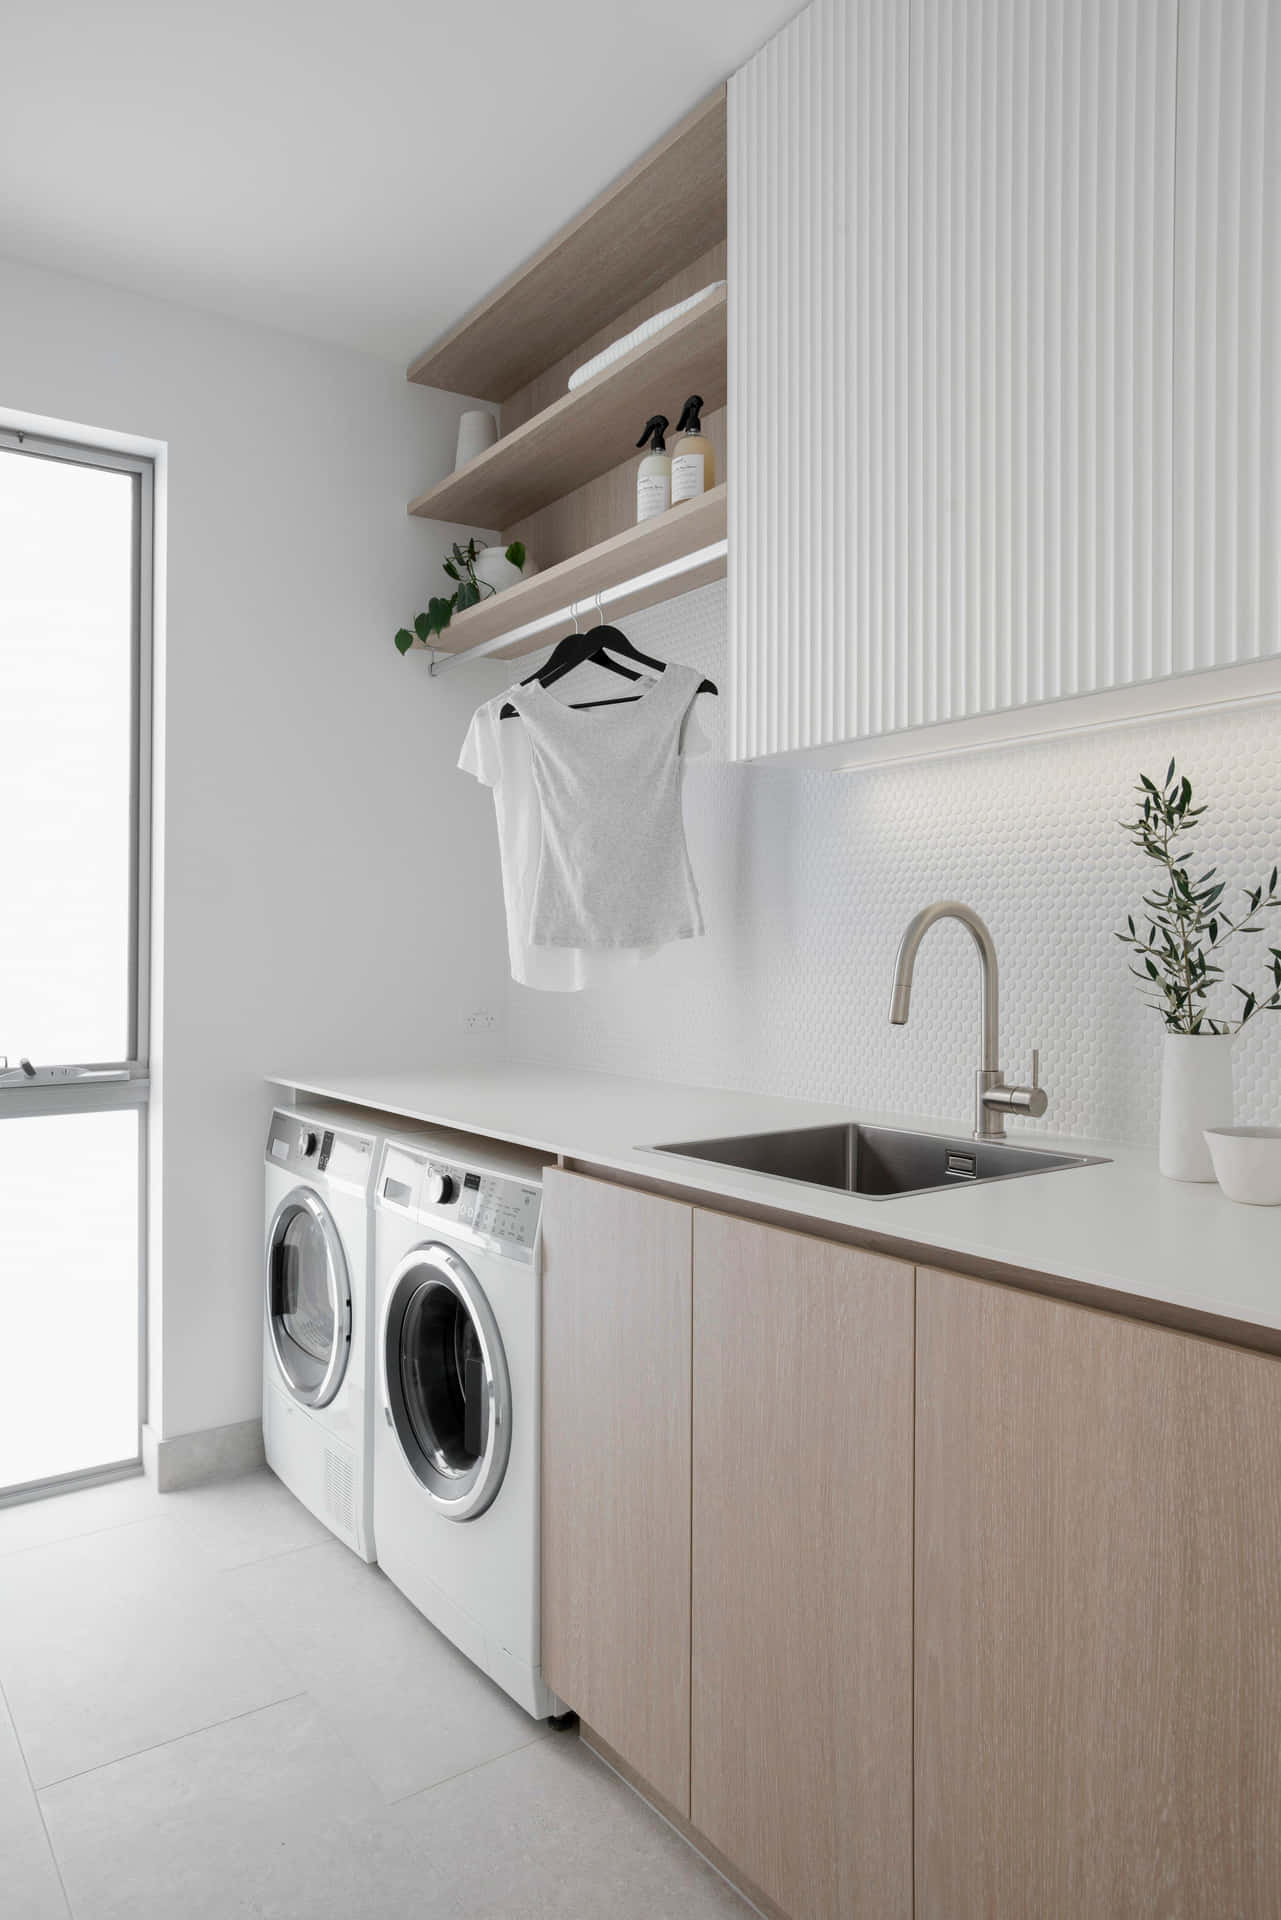 A Bright and Efficient Laundry Room